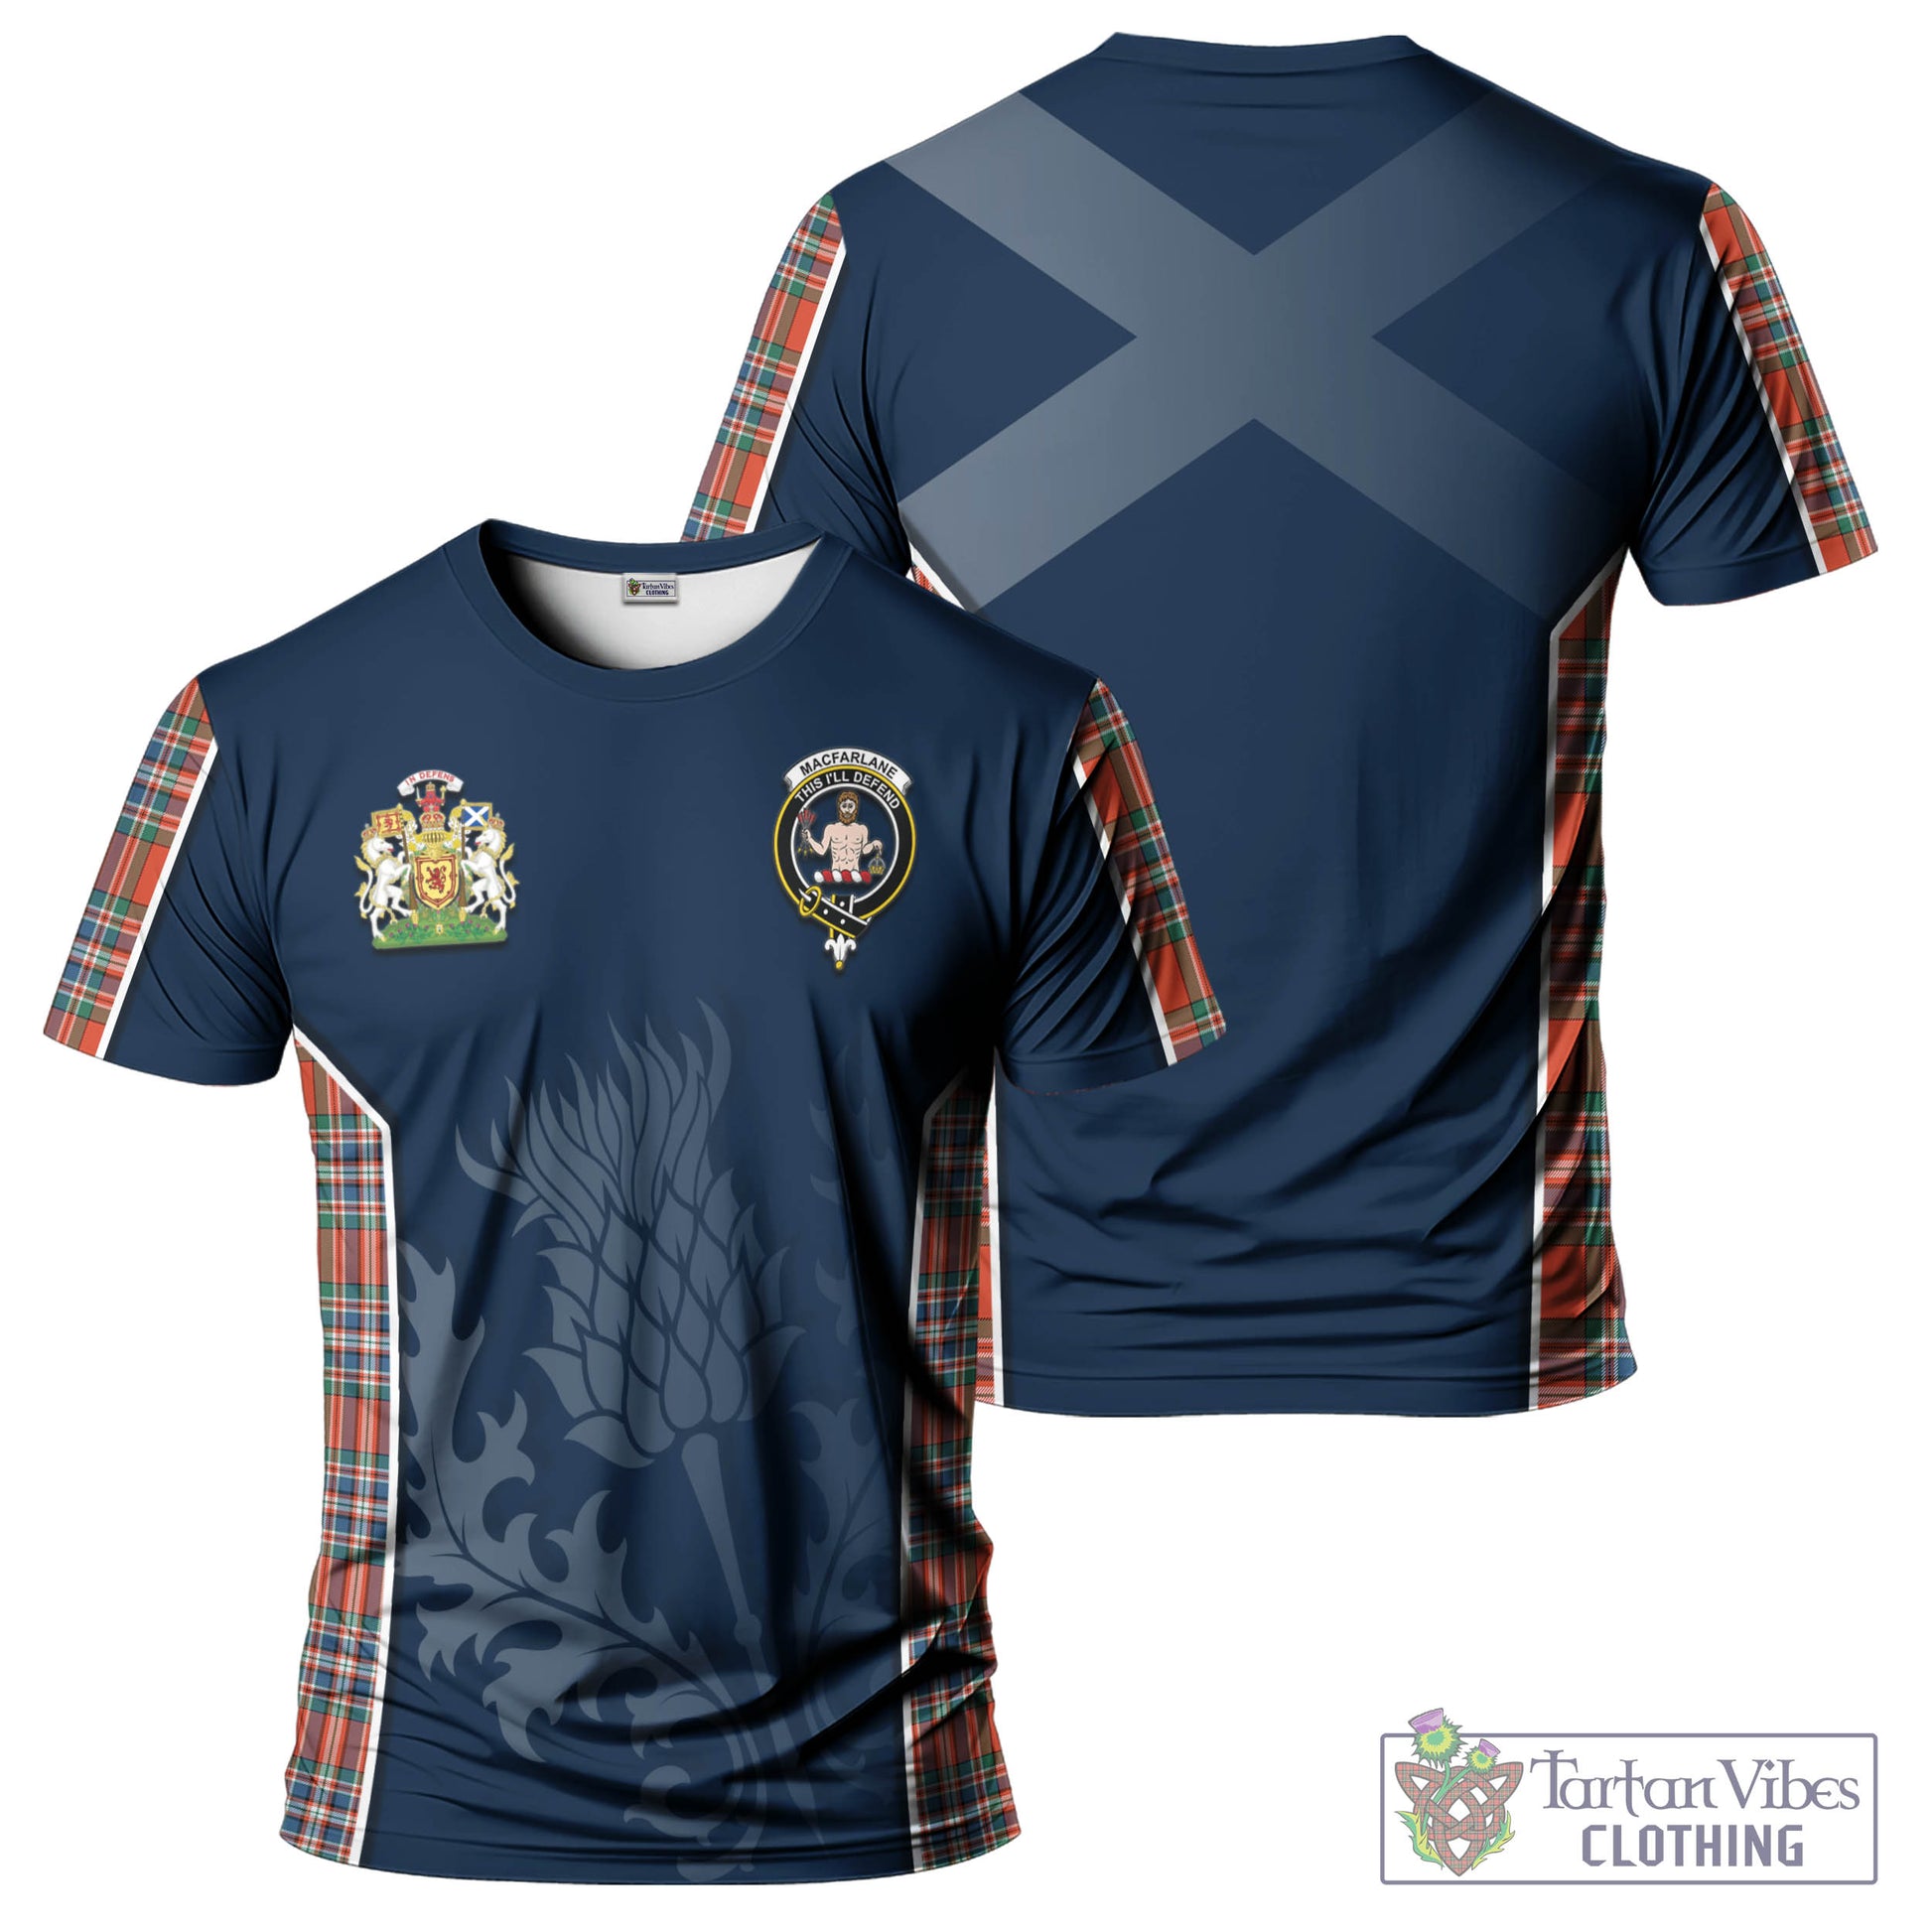 Tartan Vibes Clothing MacFarlane Ancient Tartan T-Shirt with Family Crest and Scottish Thistle Vibes Sport Style